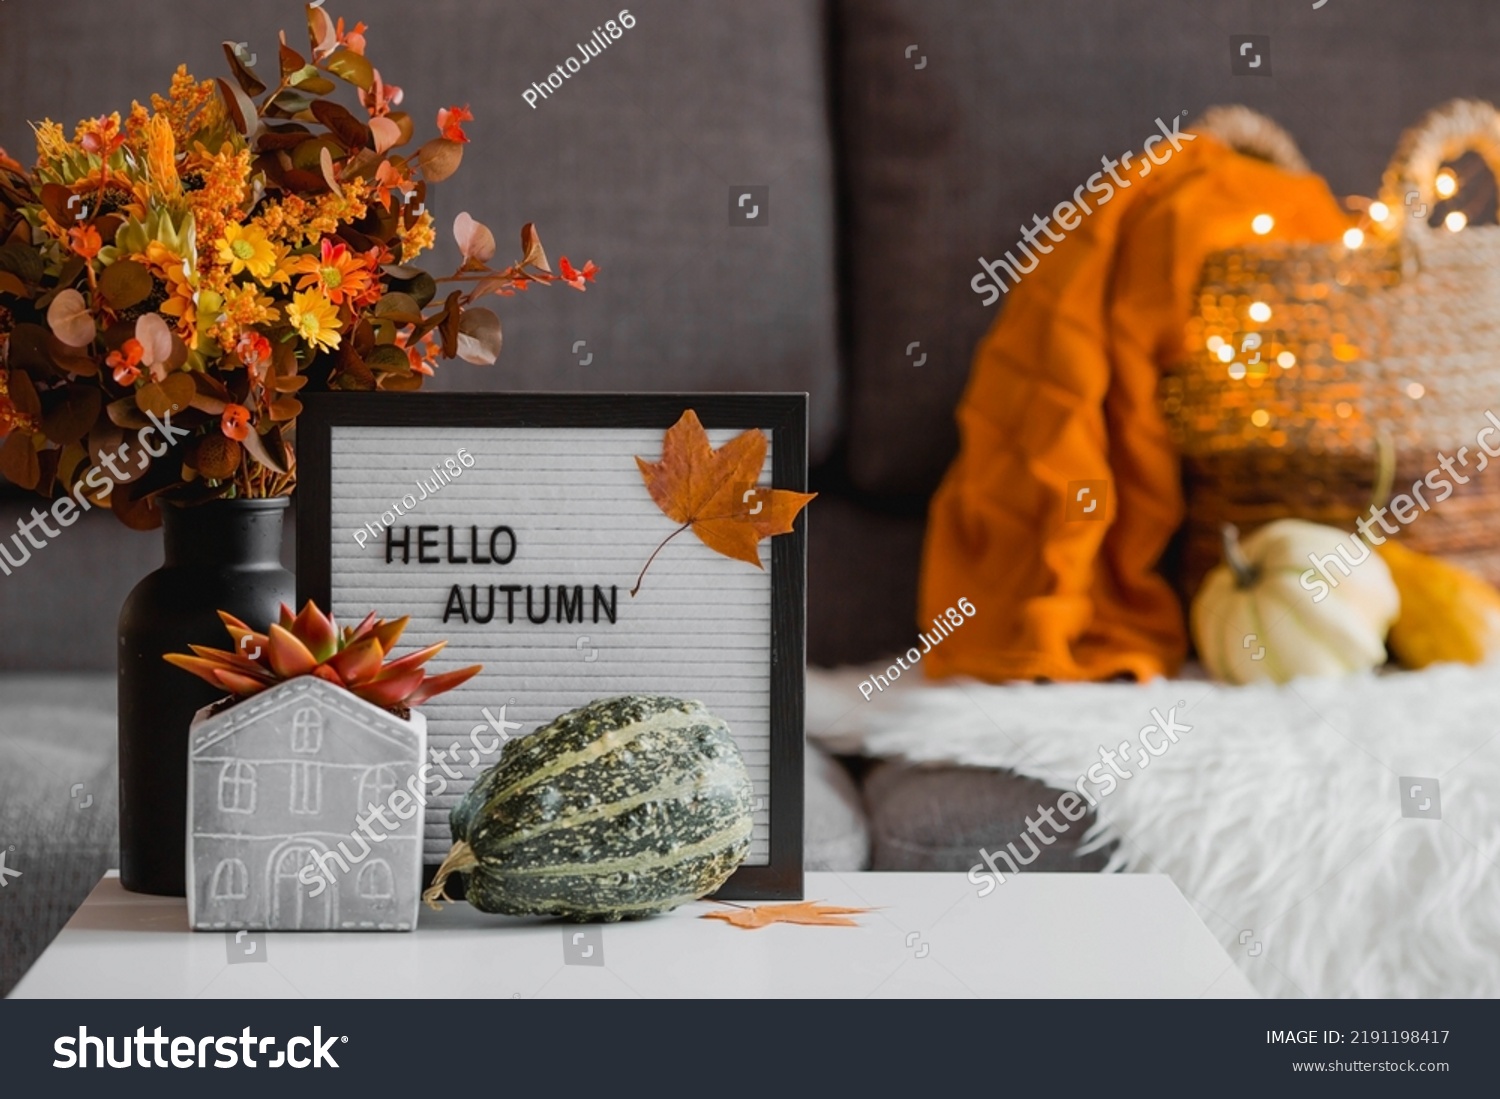 Cozy autumn concept. Home warmth in cold weather. Still-life. A blanket, pumpkins, flowers and the inscription home on the coffee table in the home interior of the living room. #2191198417